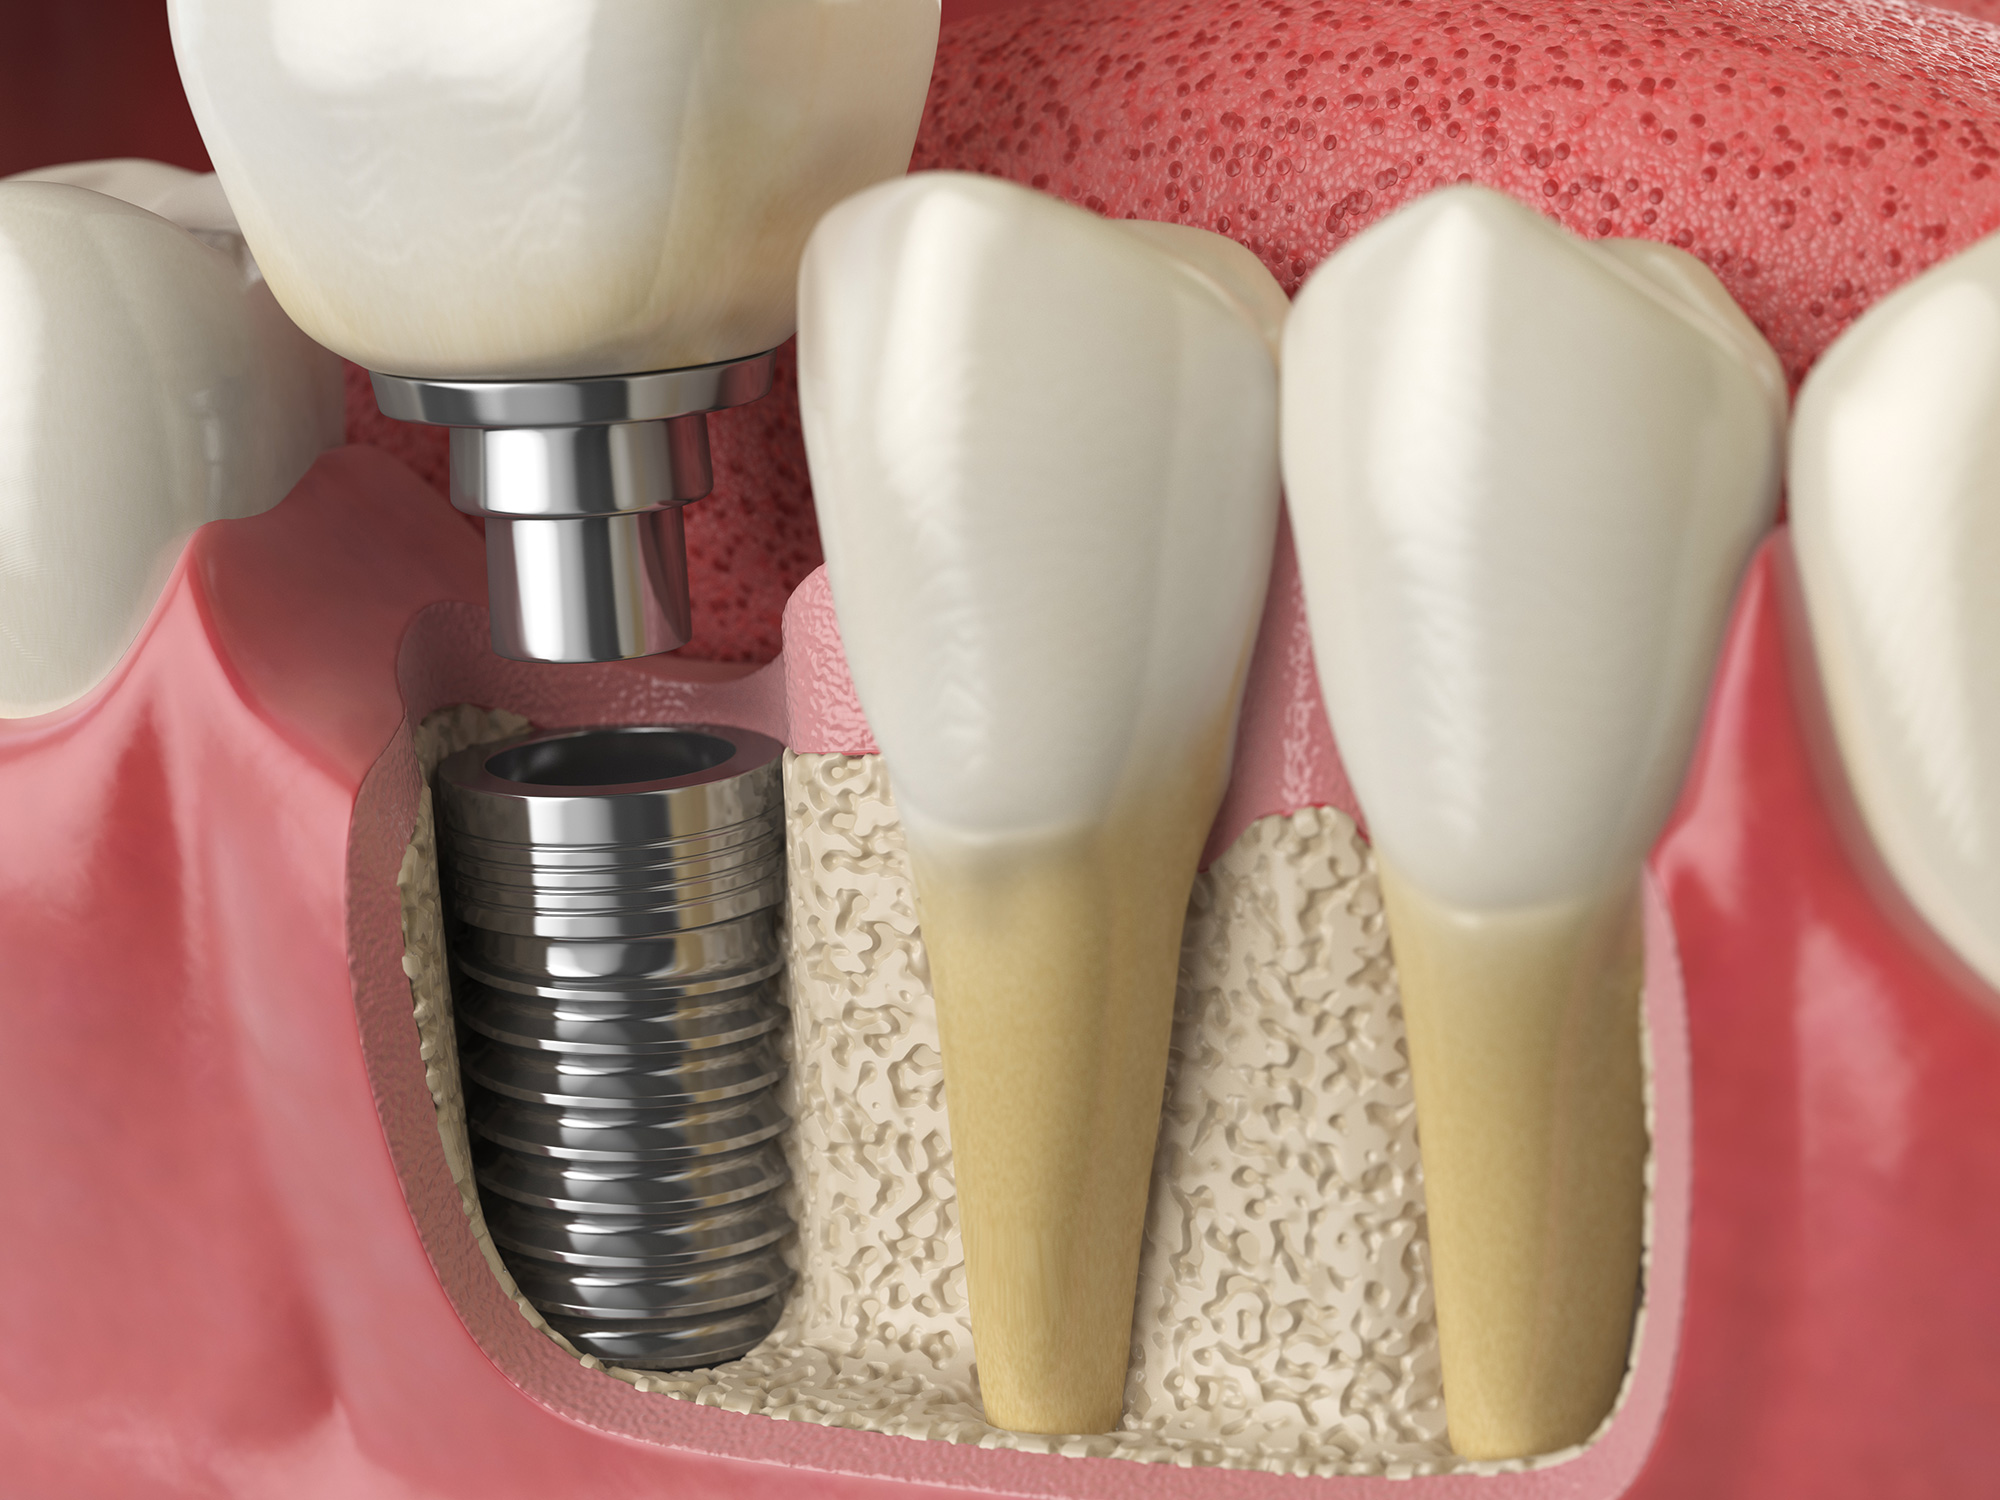 Dental implants Bissell Periodontist Chester New Jersey